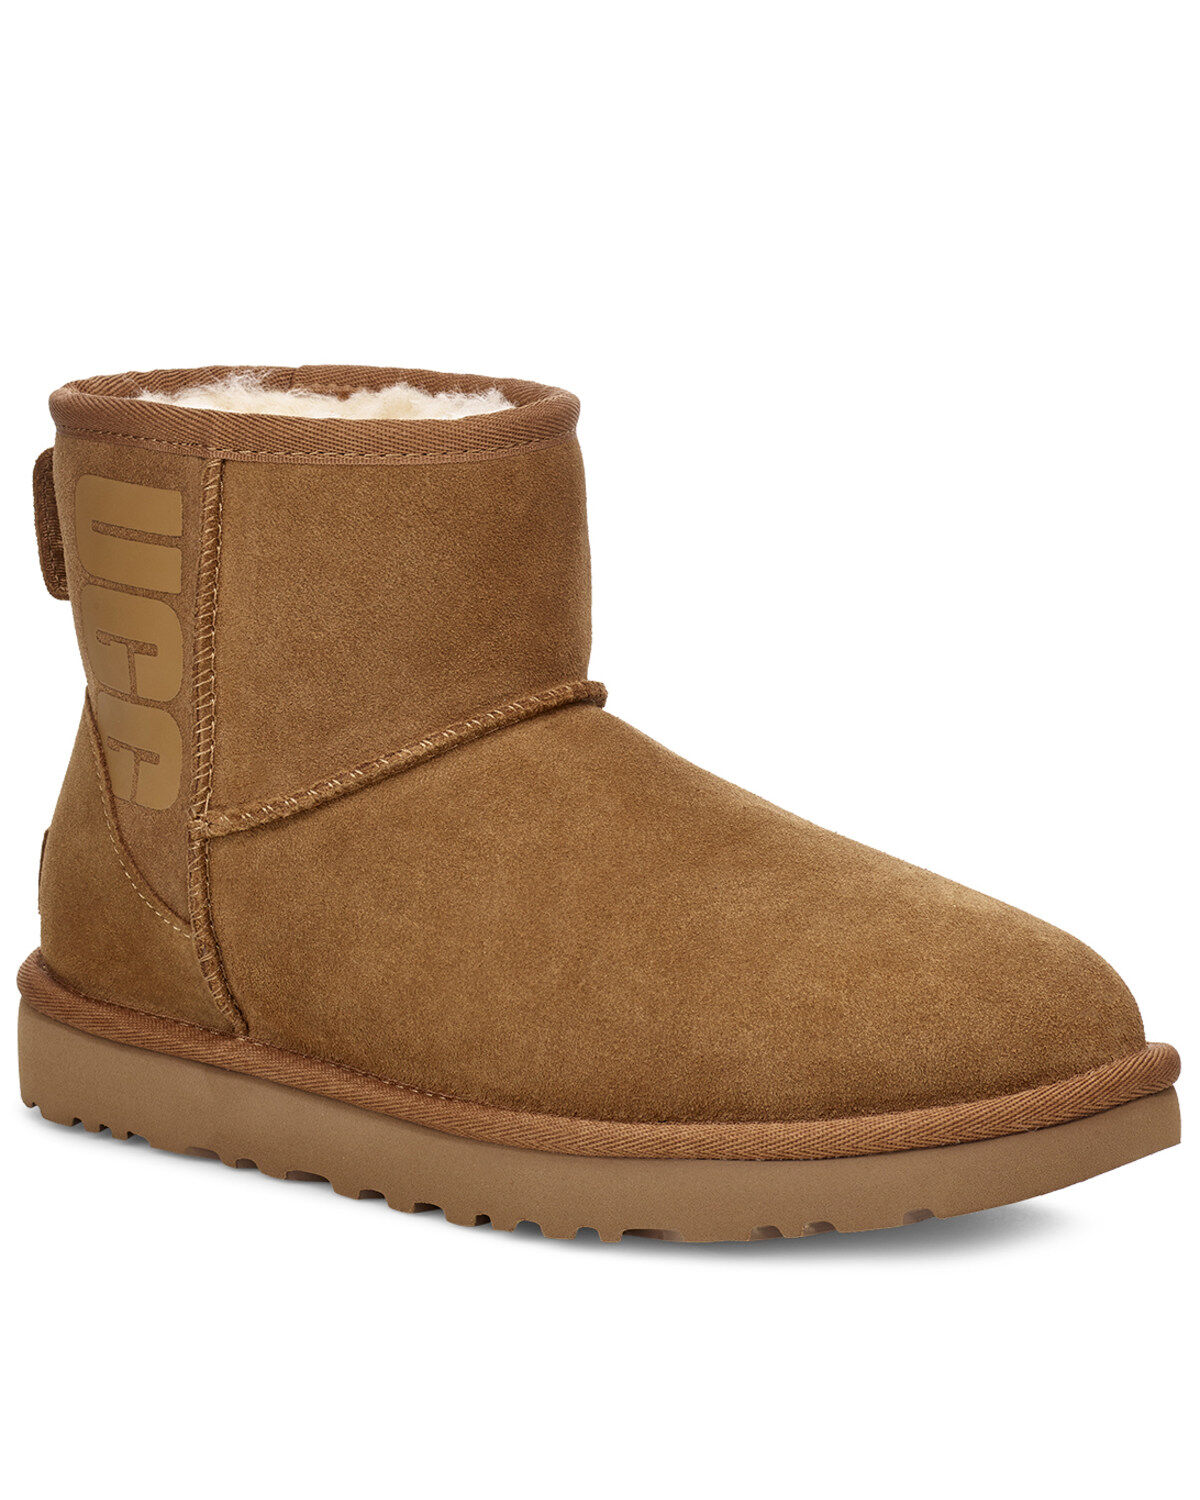 the price of ugg boots